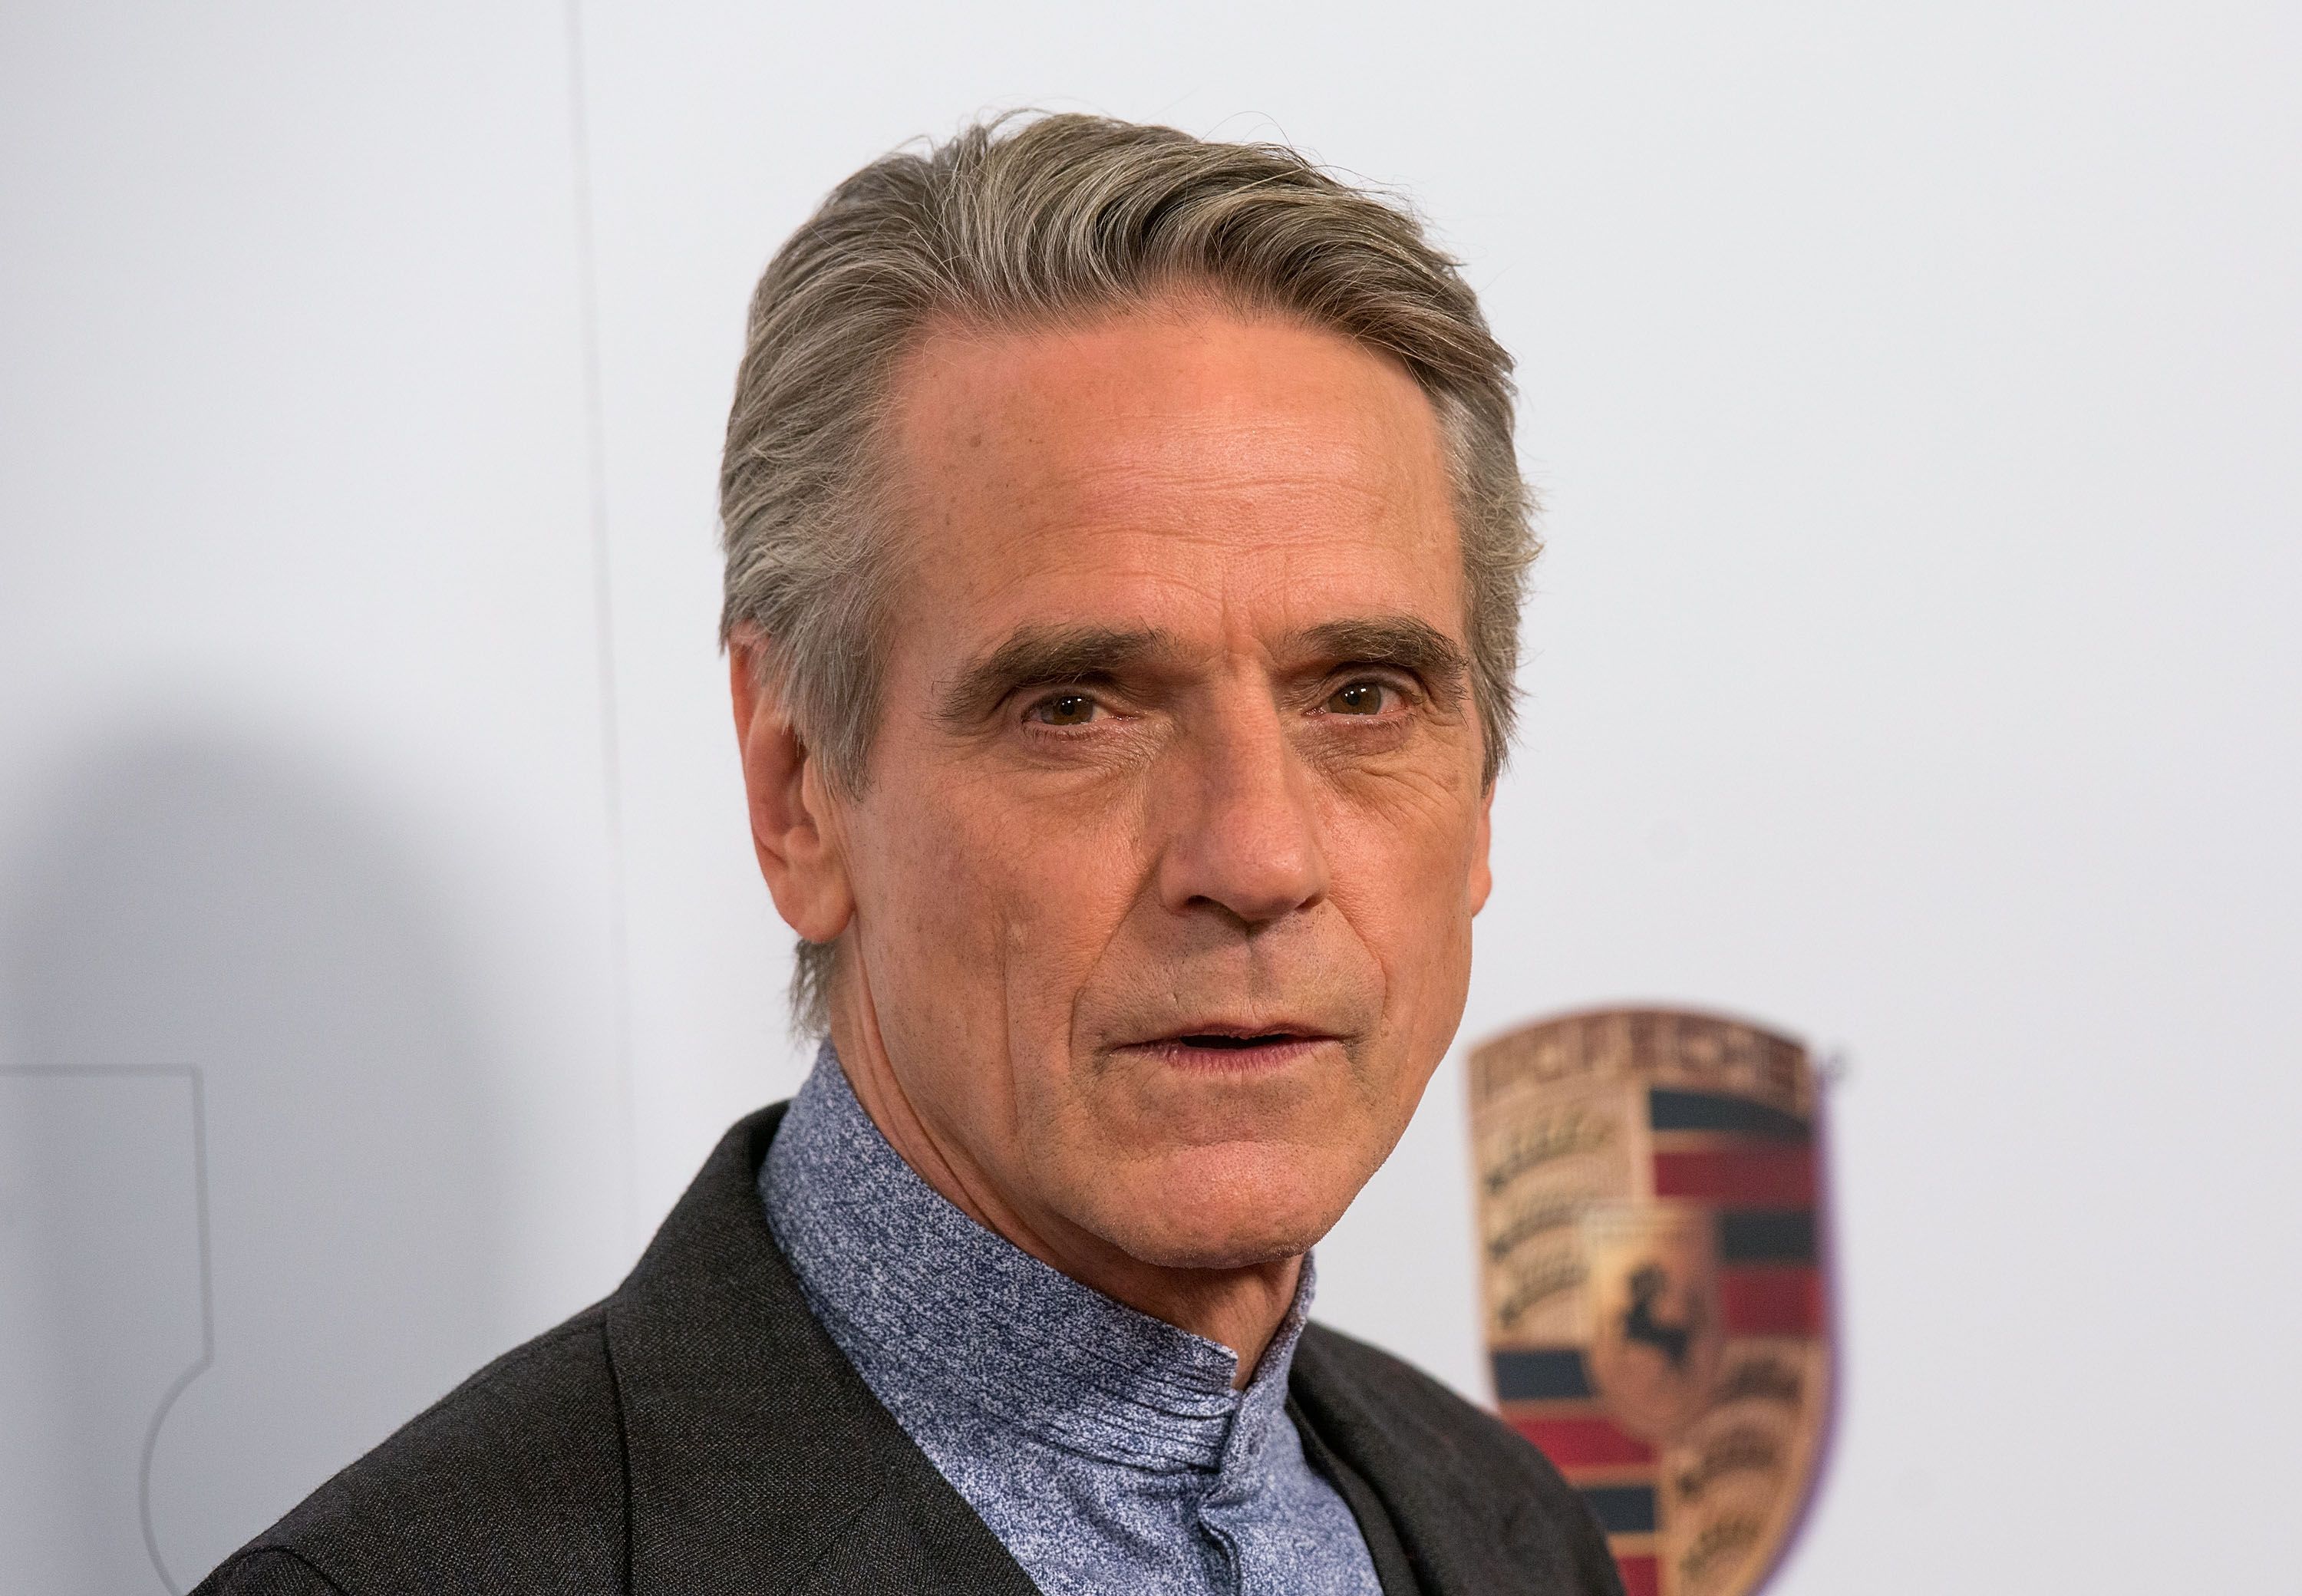 Jeremy Irons at the AARP The Magazine's 14th Annual Movies For Grownups Awards Gala at the Beverly Wilshire Four Seasons Hotel on February 2, 2015, in Beverly Hills, California. | Source: Getty Images